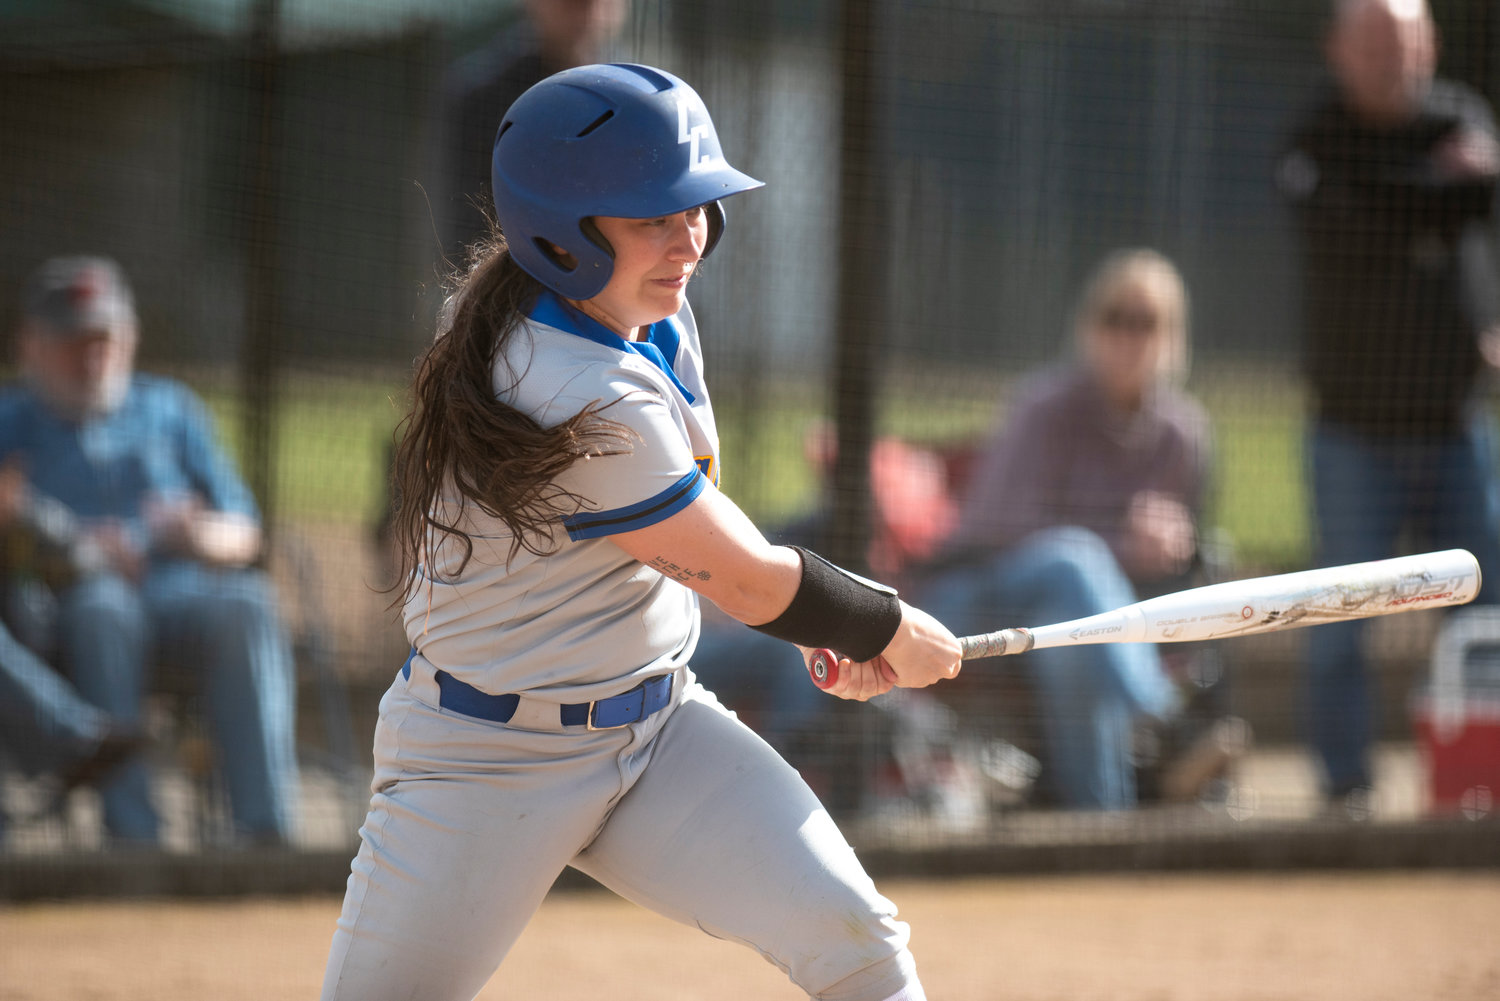 Centralia College's Casey Wentz smacks a base hit against Chemeketa during a home game on March 25.